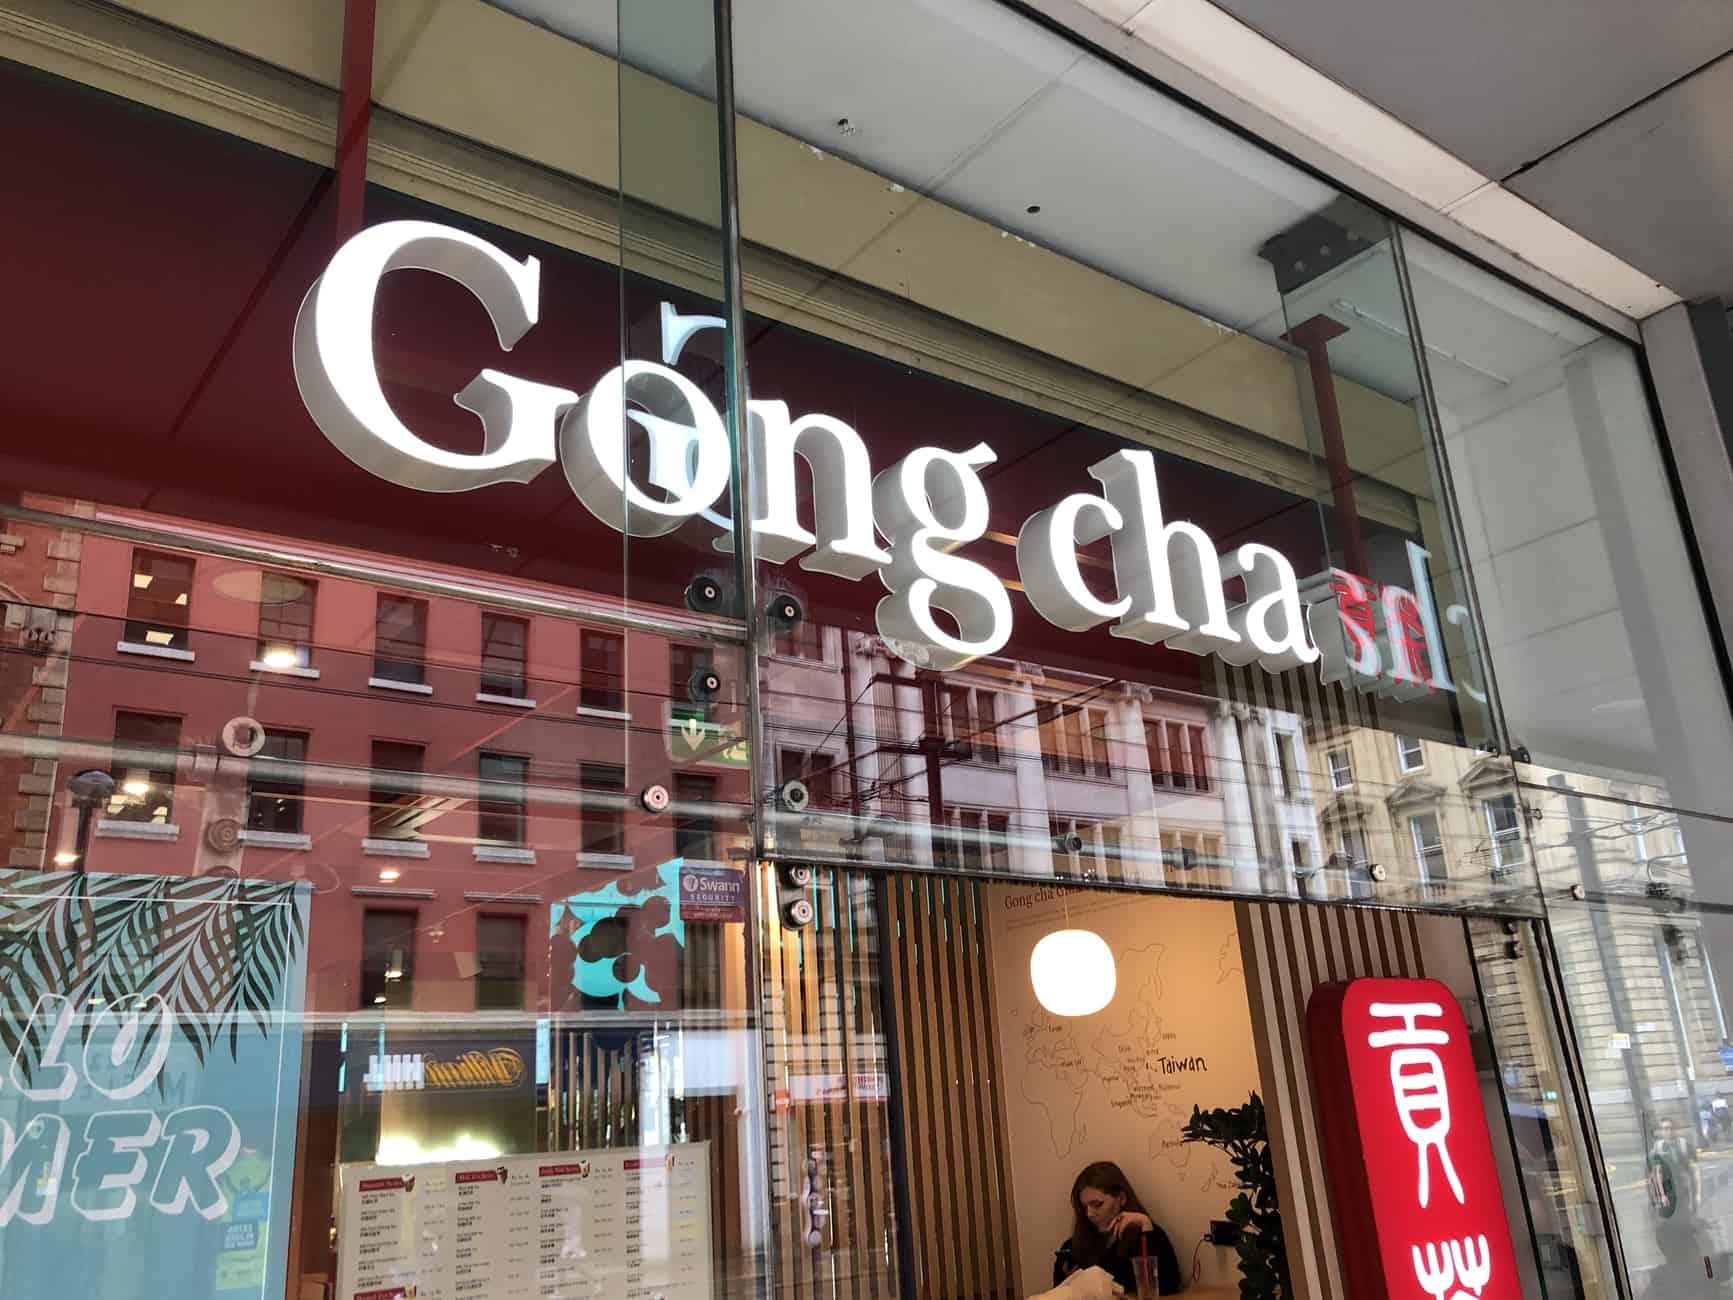 Is Gong Cha The Best Bubble Tea in Manchester? Let’s Find Out